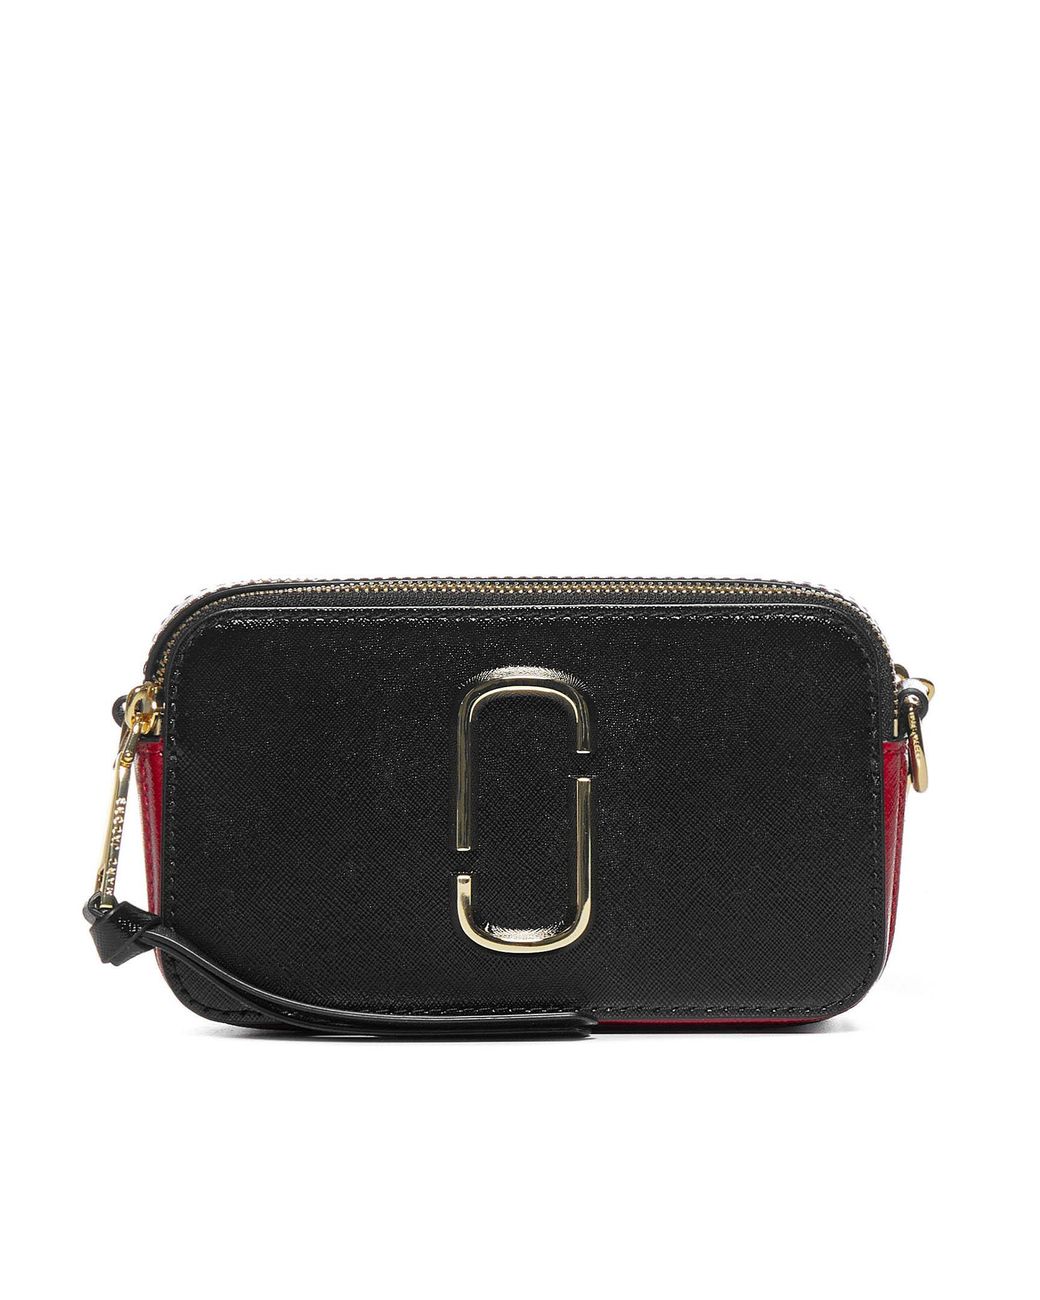 Marc Jacobs Leather The Snapshot Camera Bag in Black - Lyst